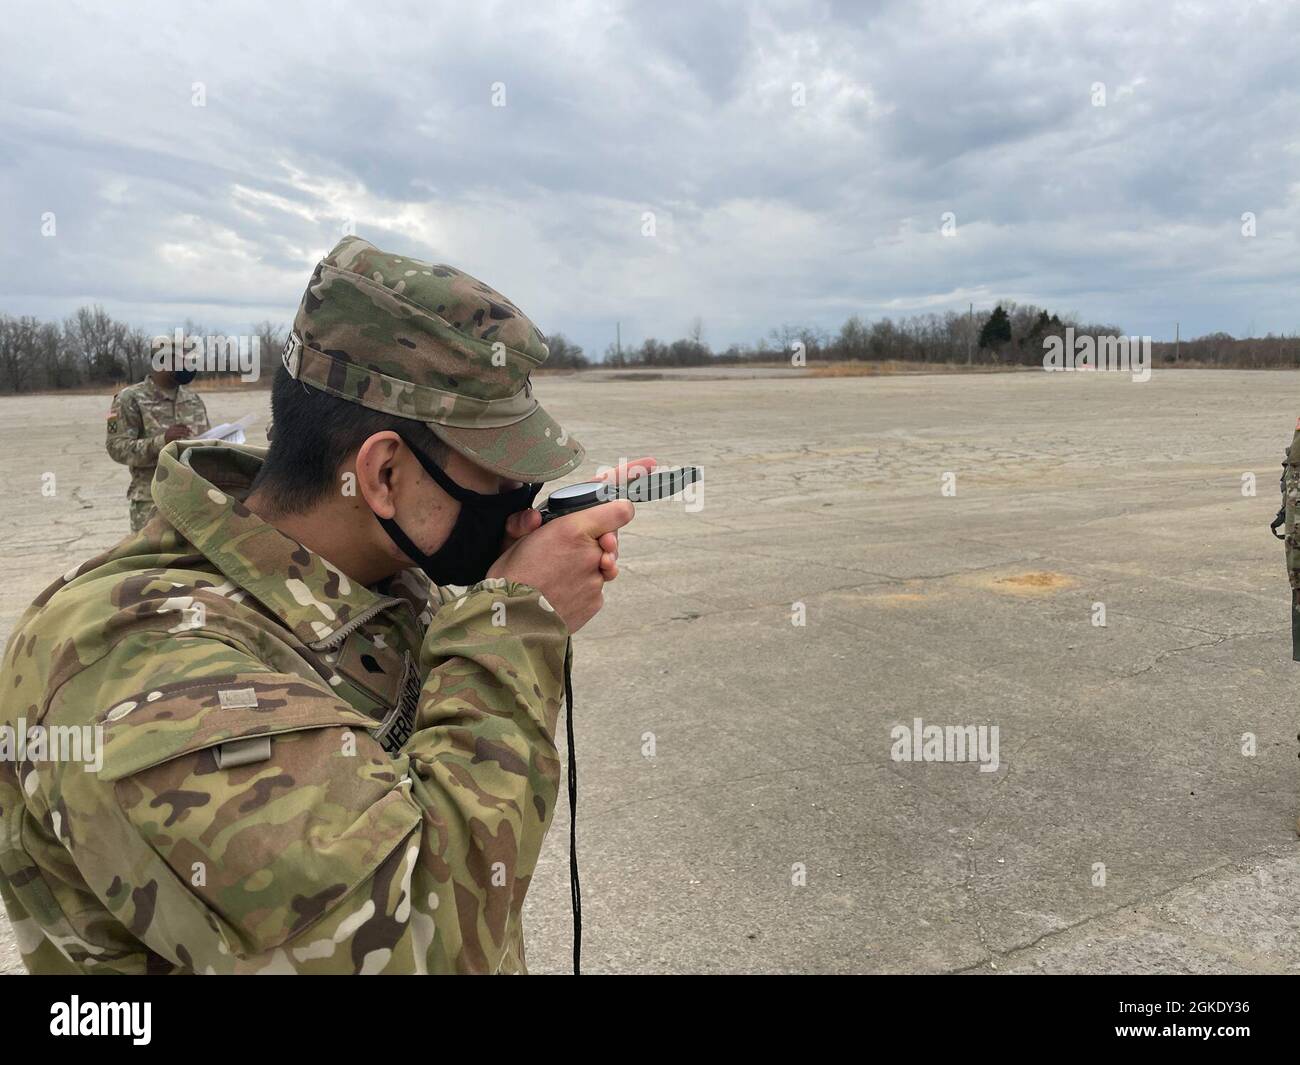 Spc. Alexander Hernandez, financial support specialist, 1st Theater Sustainment Command, practices shooting an azimuth with a compass during land navigation training at Fort Knox, Kentucky, March 25, 2021. Land navigation requires traversing unfamiliar territory using basic tools such as a compass and a paper map to get from one point to another. Stock Photo